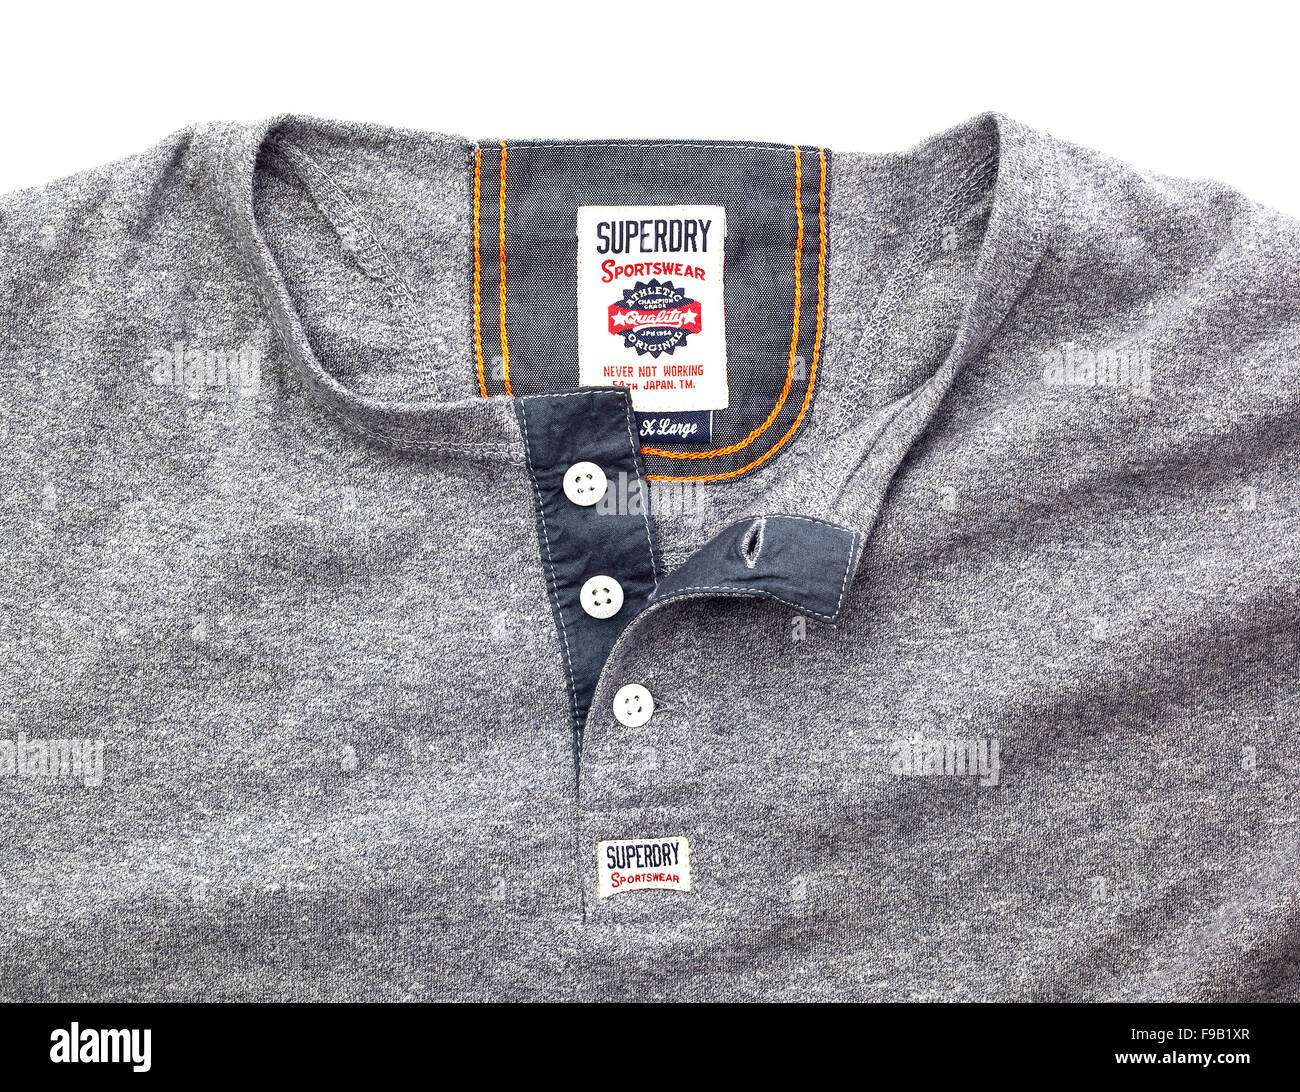 Superdry Sportswear showing logo on a White Background Stock Photo - Alamy